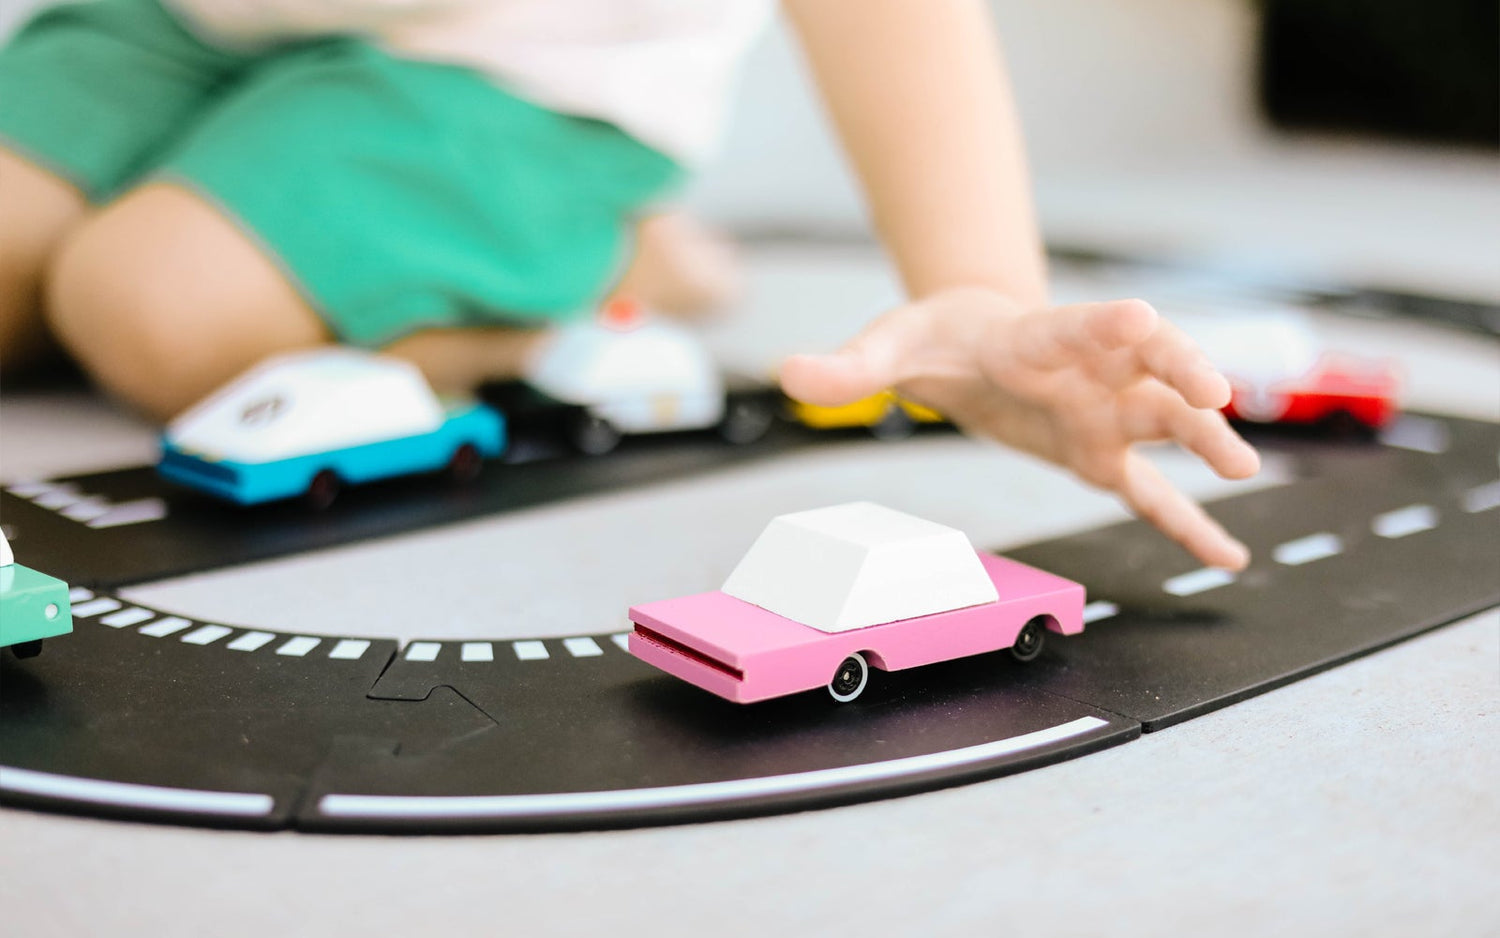 Pink Sedan toy car by Candylab Toys features solid beech wood and water-based paints. Made sustainably, made to last, made for fun. Wood, soy inks, water-based paints, degradable rubber, and metal parts are all part of Candylab's old school way of making toys, with a modern design twist.